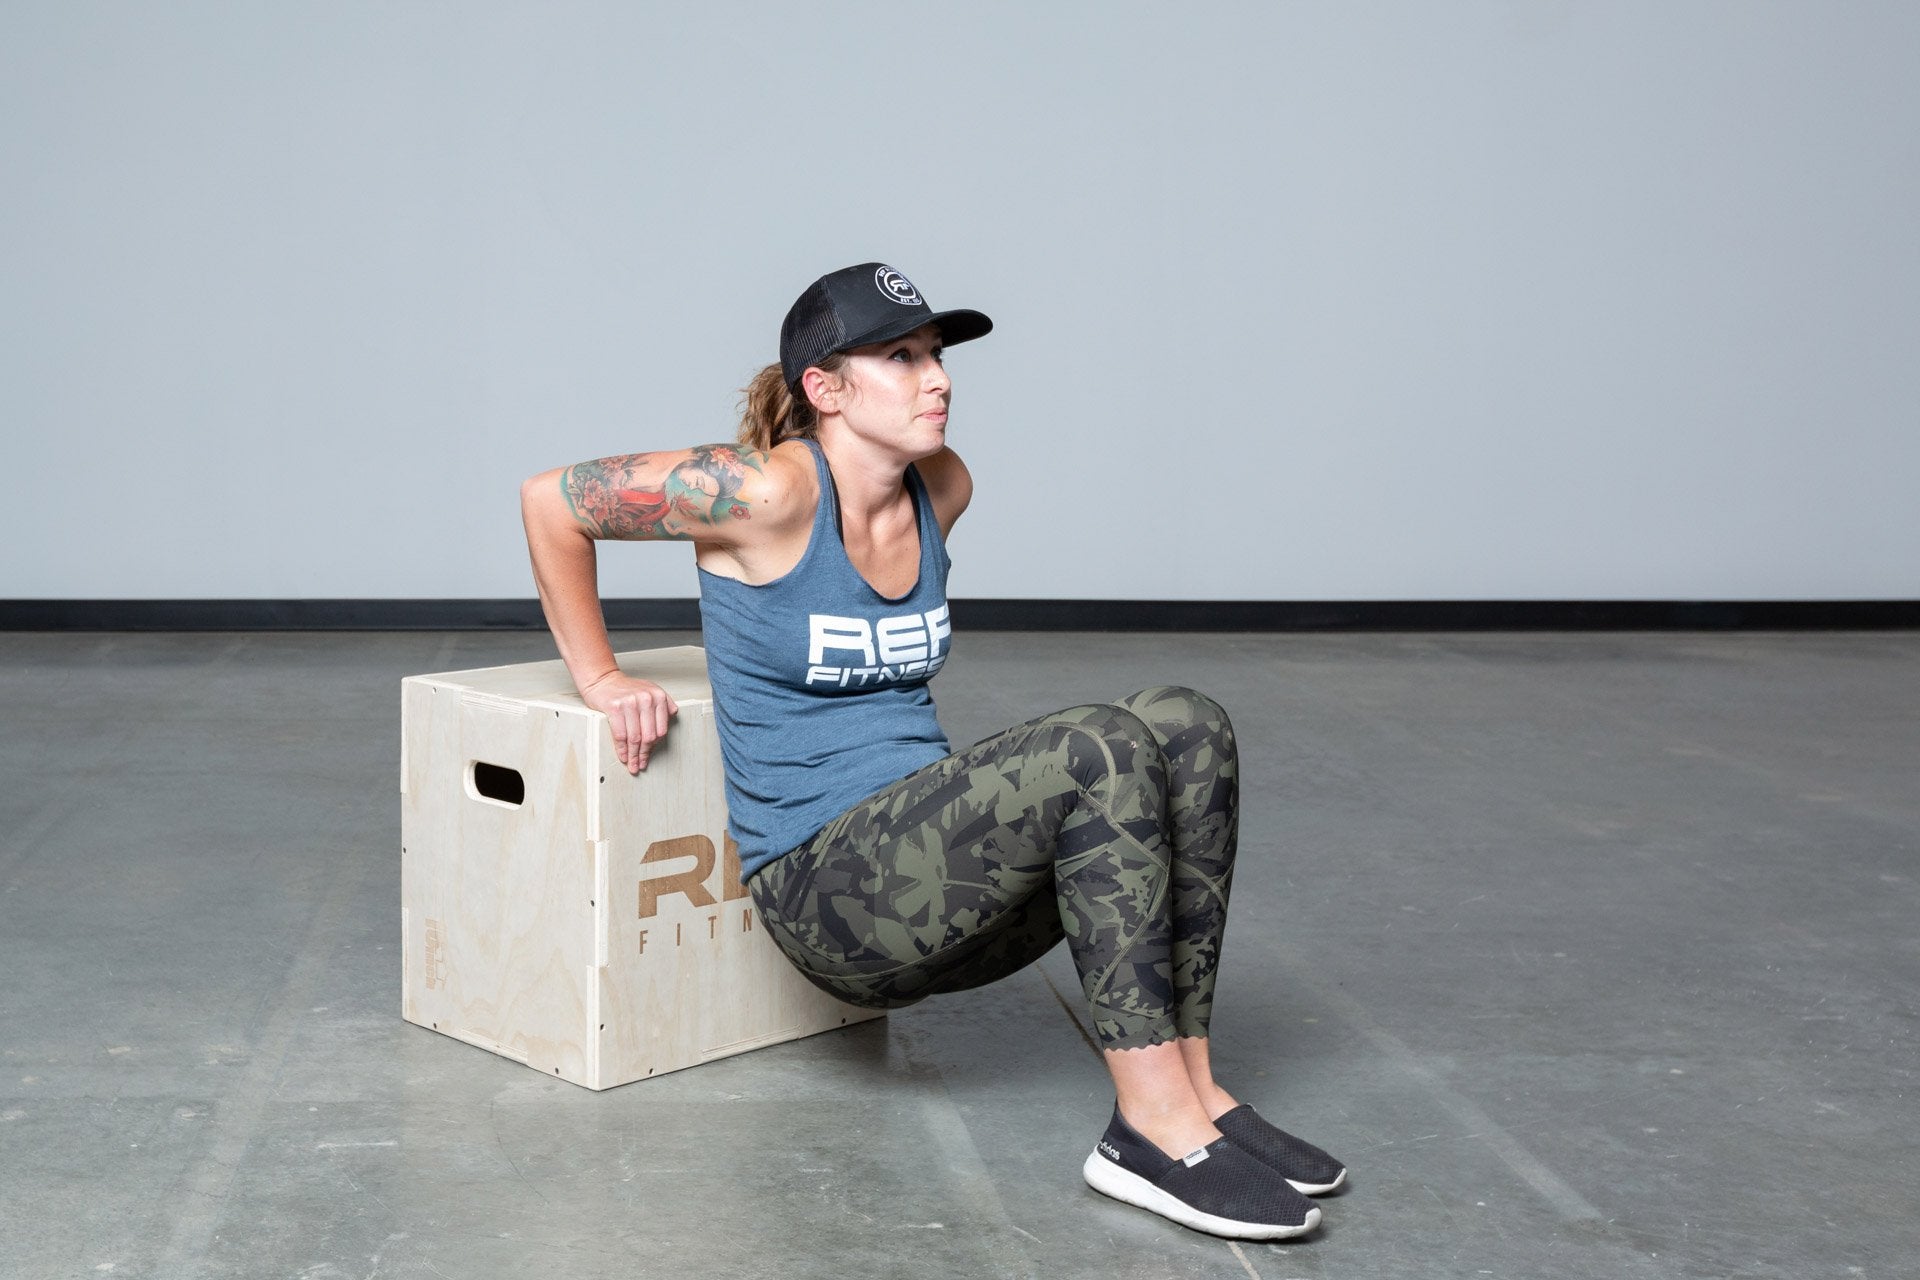 3-in-1 Wood Plyo Boxes